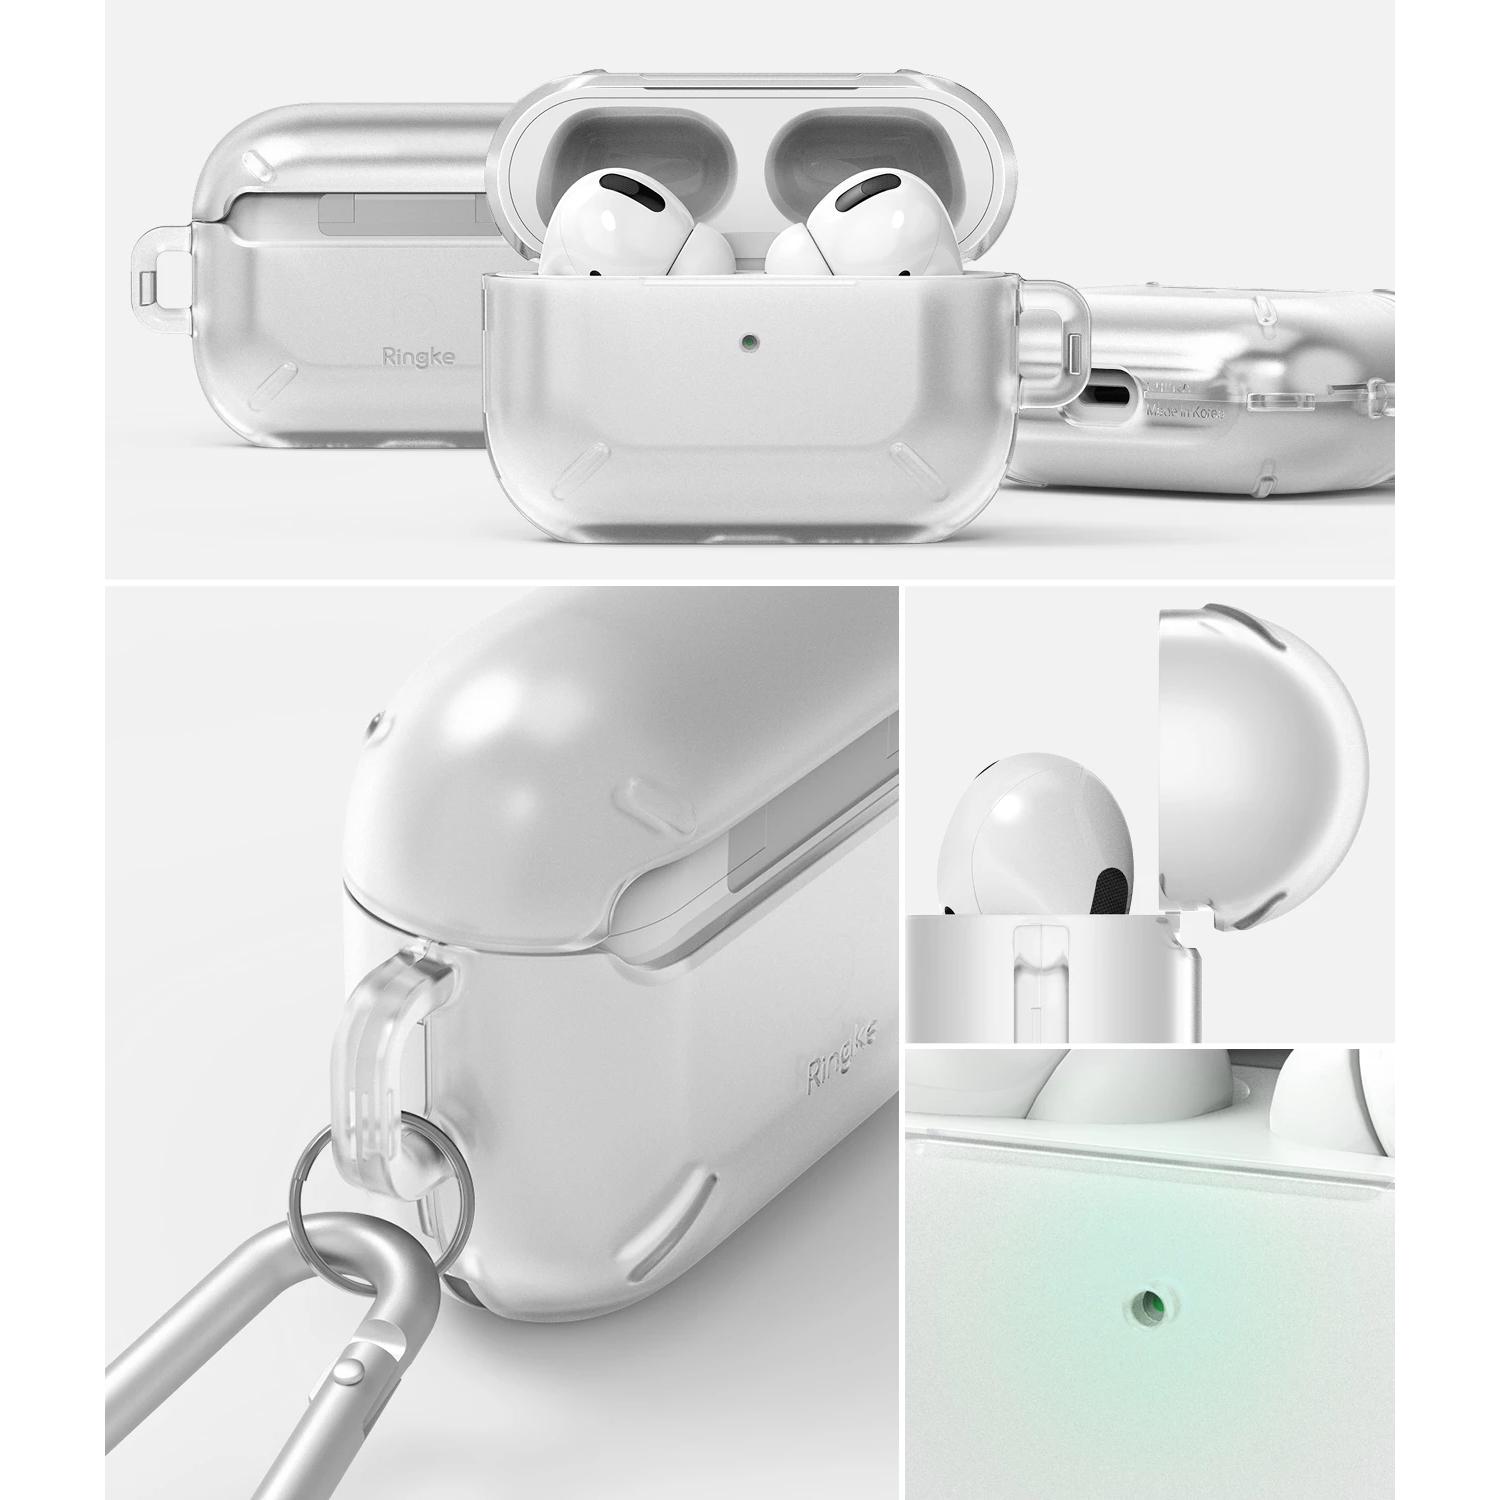 AirPods Pro Layered Case Matte Clear